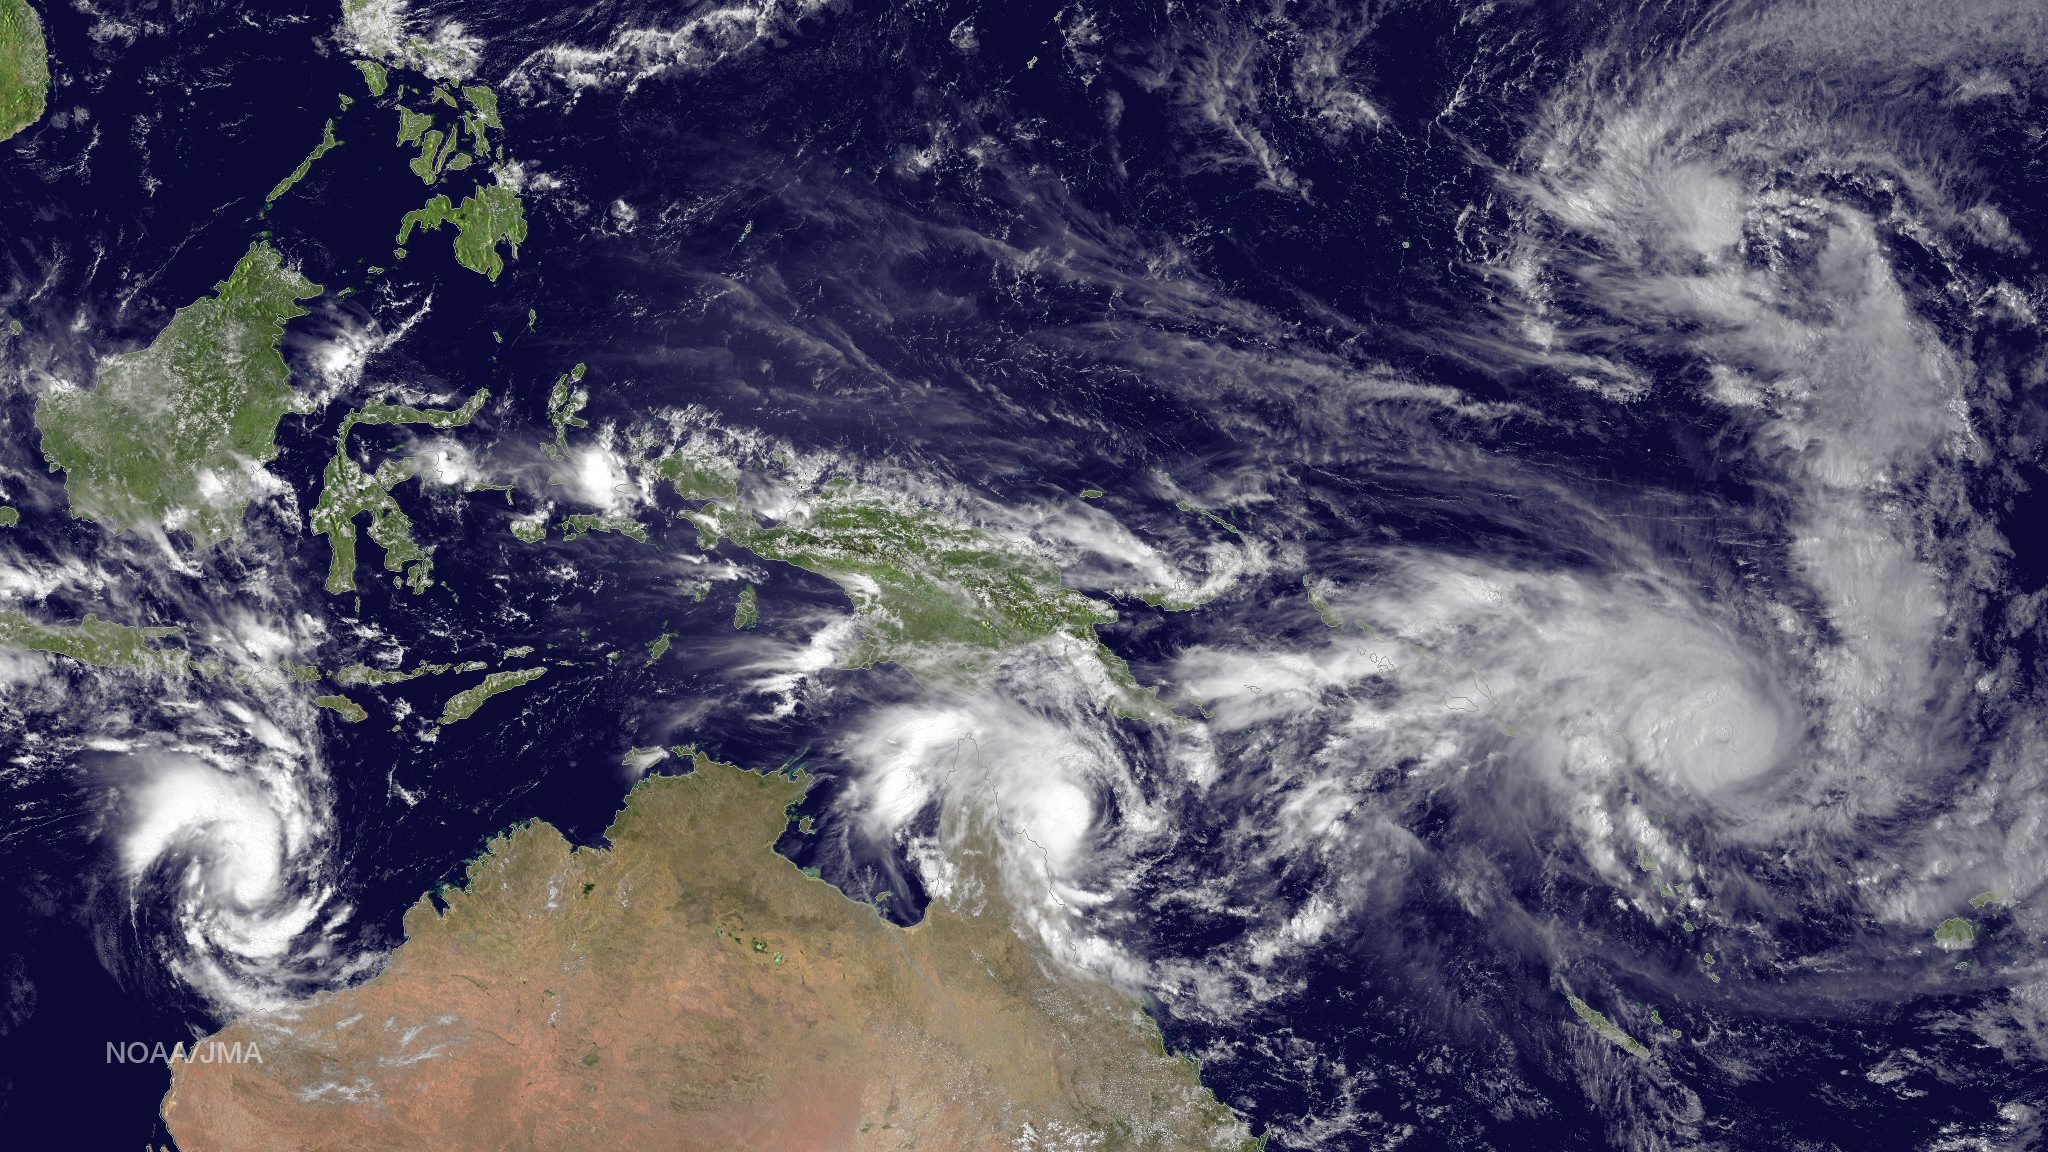 Left to right: Tropical Cyclone Olwyn in the Indian Ocean heading south for landfall near Learmonth on the west coast of Australia, Tropical Cyclone Nathan meanders northeast of Cooktown, Queensland, Australia in the Coral Sea, Tropical Cyclone Pam tracks due south heading for the islands of Vanuatu in the southern Pacific Ocean and Tropical Depression 3 heads west-northwest towards Guam in the northern Pacific Ocean on March 11, 2015.